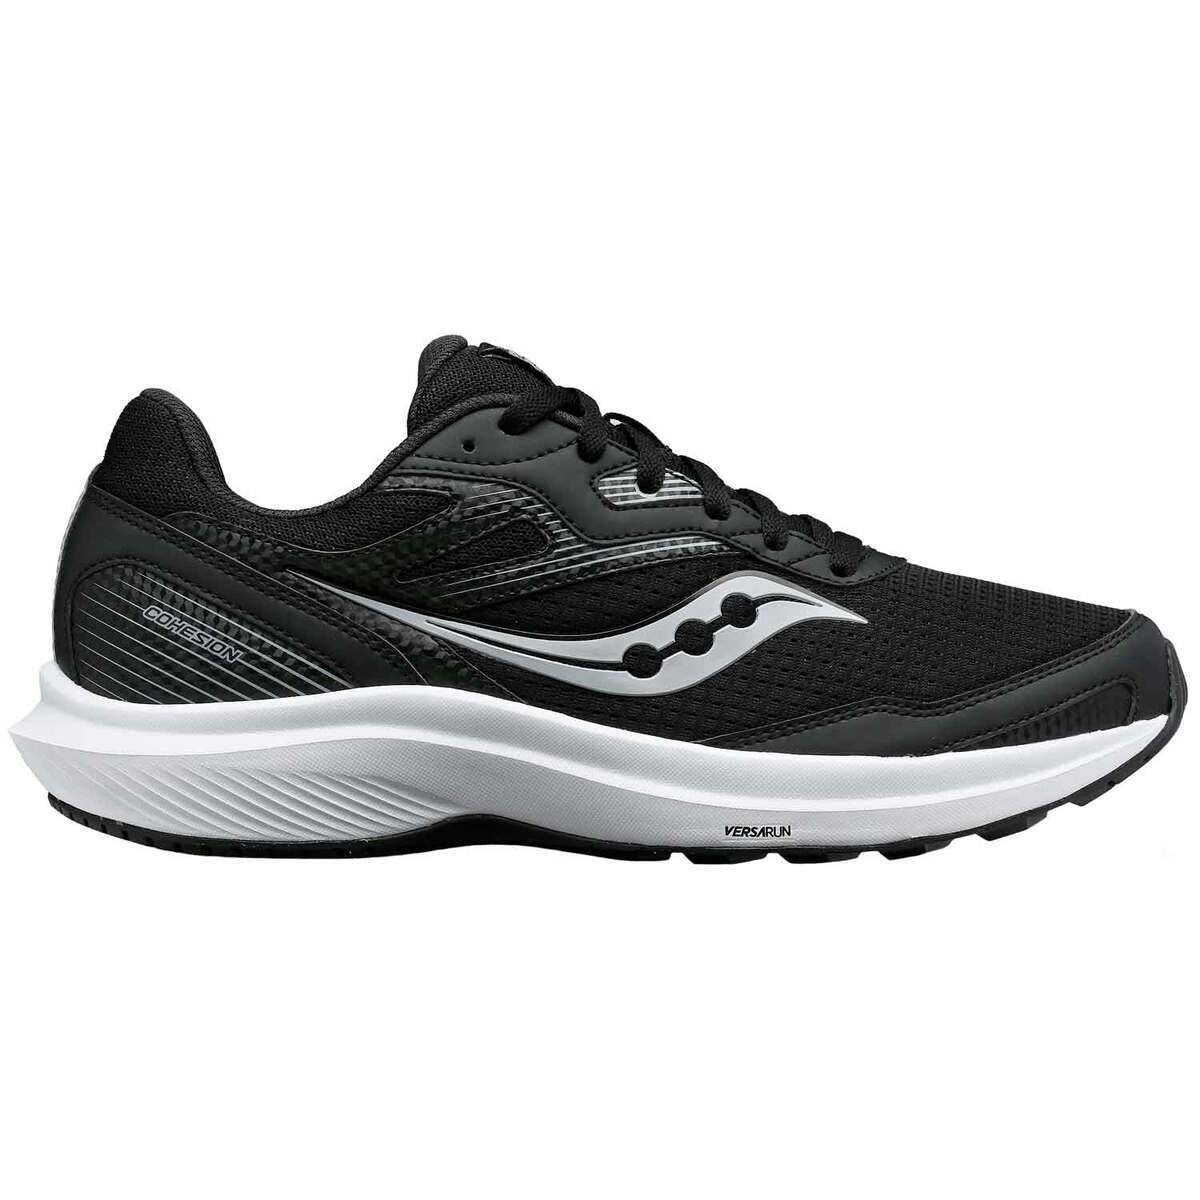 Saucony Men's Cohesion 16 Low Trail Running Shoes - Black/White - Size ...